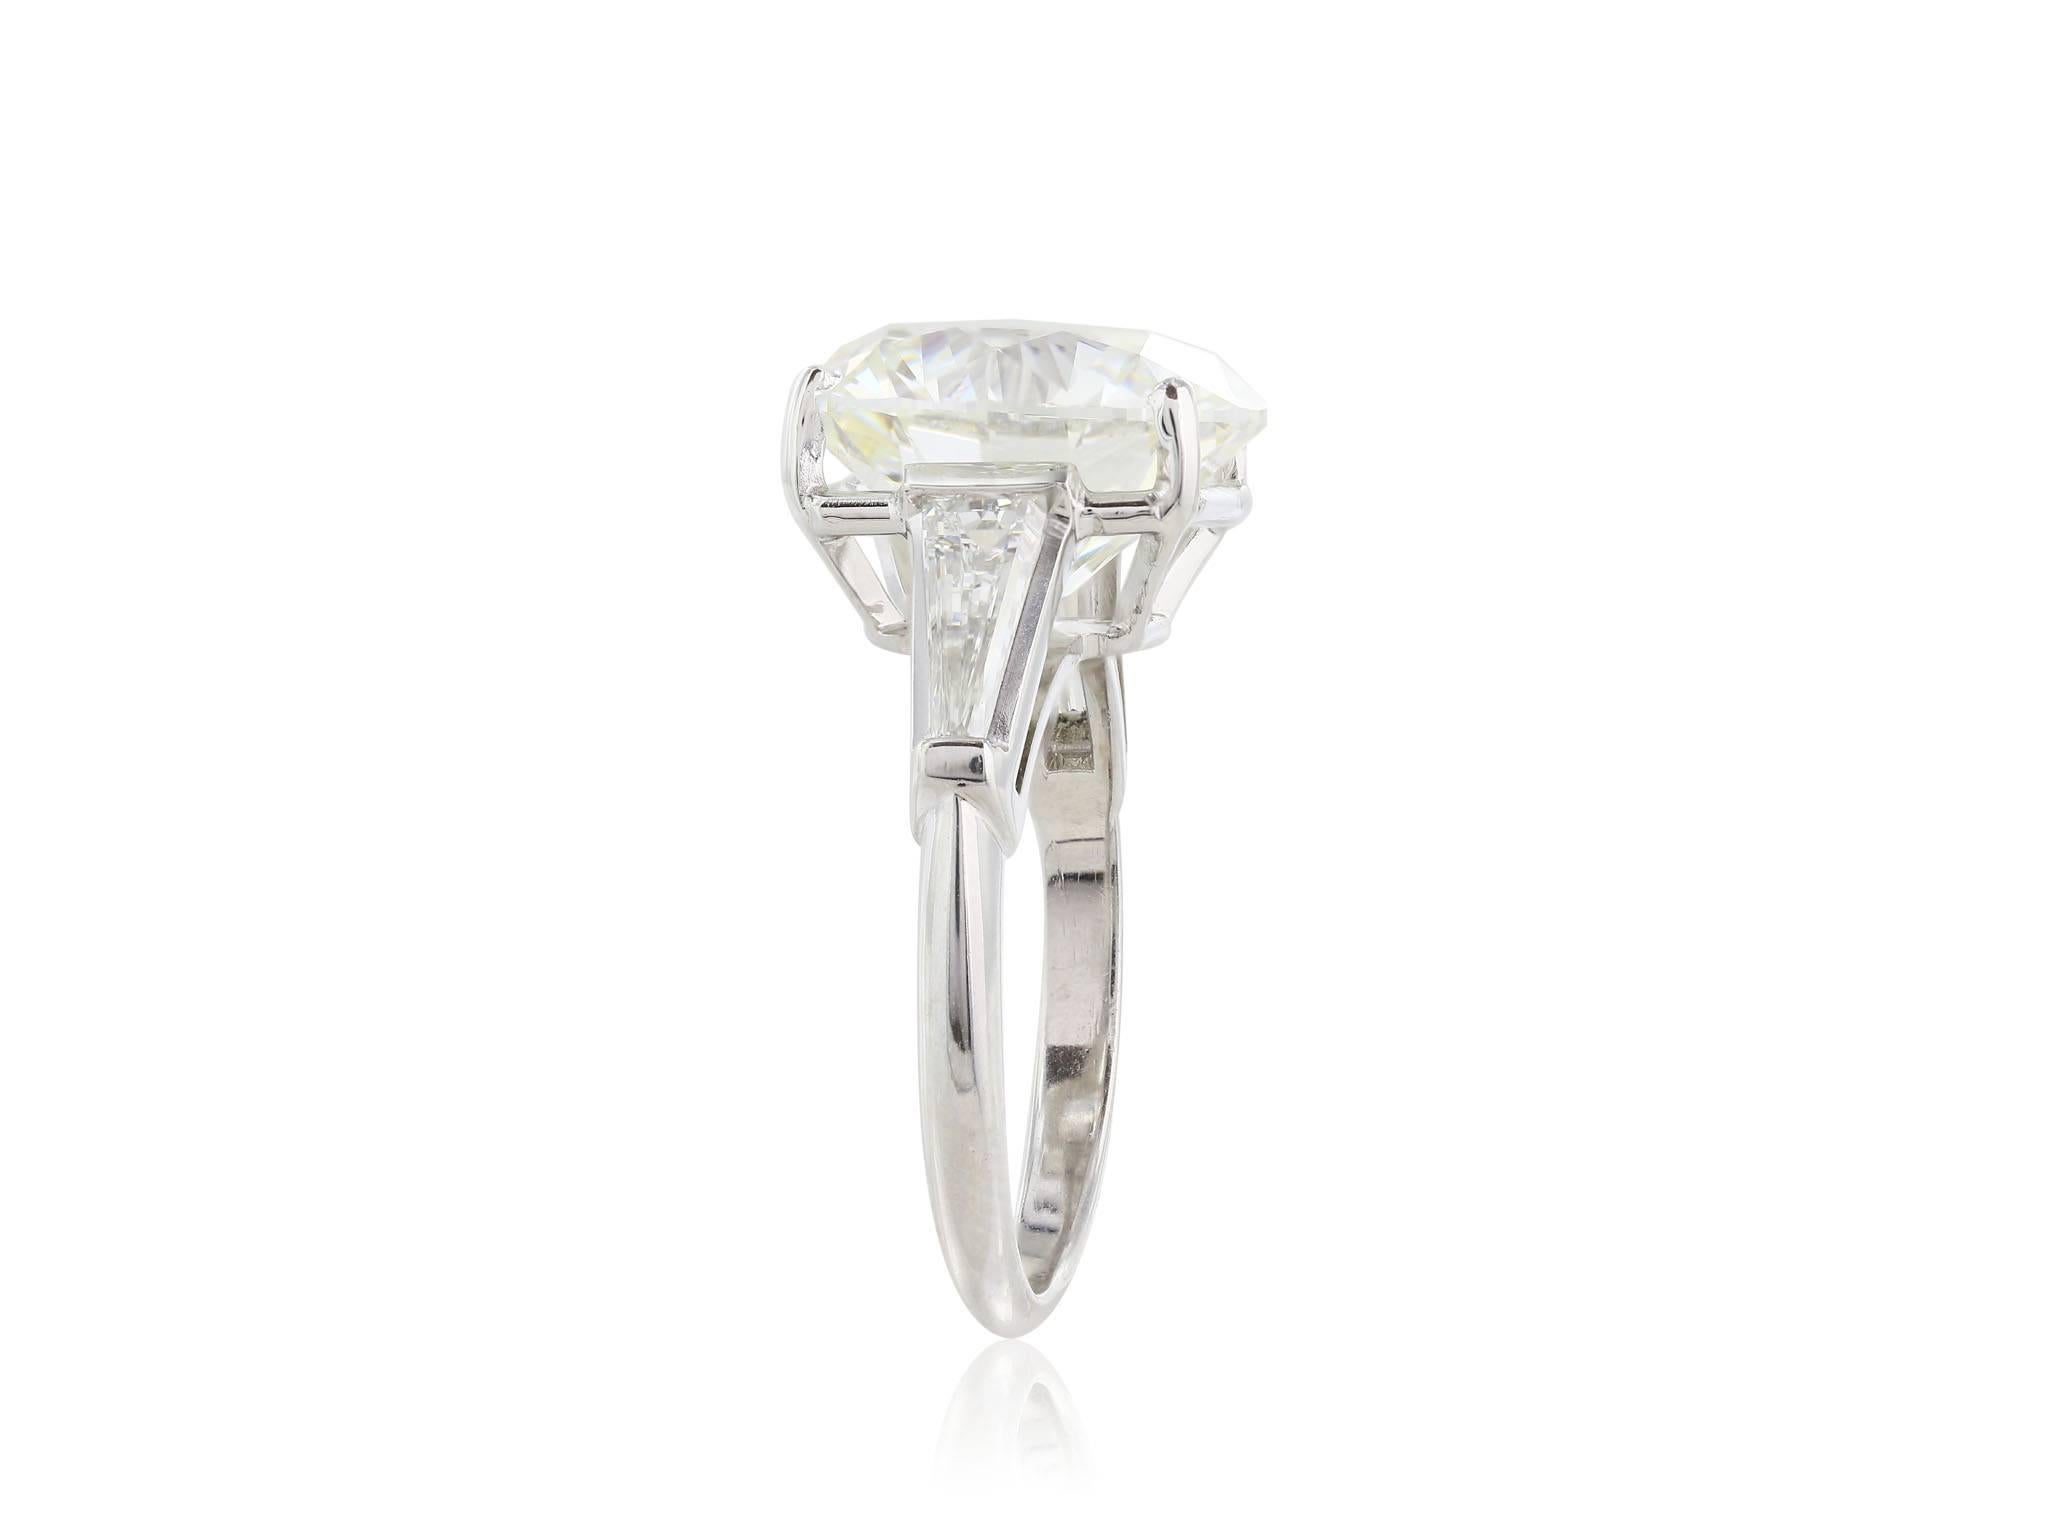 18 Karat white gold  three stone diamond ring featuring one GIA certified (cert # 2173928885) 8.04 carat round brilliant cut diamond with a color of J, and a clarity of VS2 and a triple excellence rating for excellent polish, excellent symmetry and